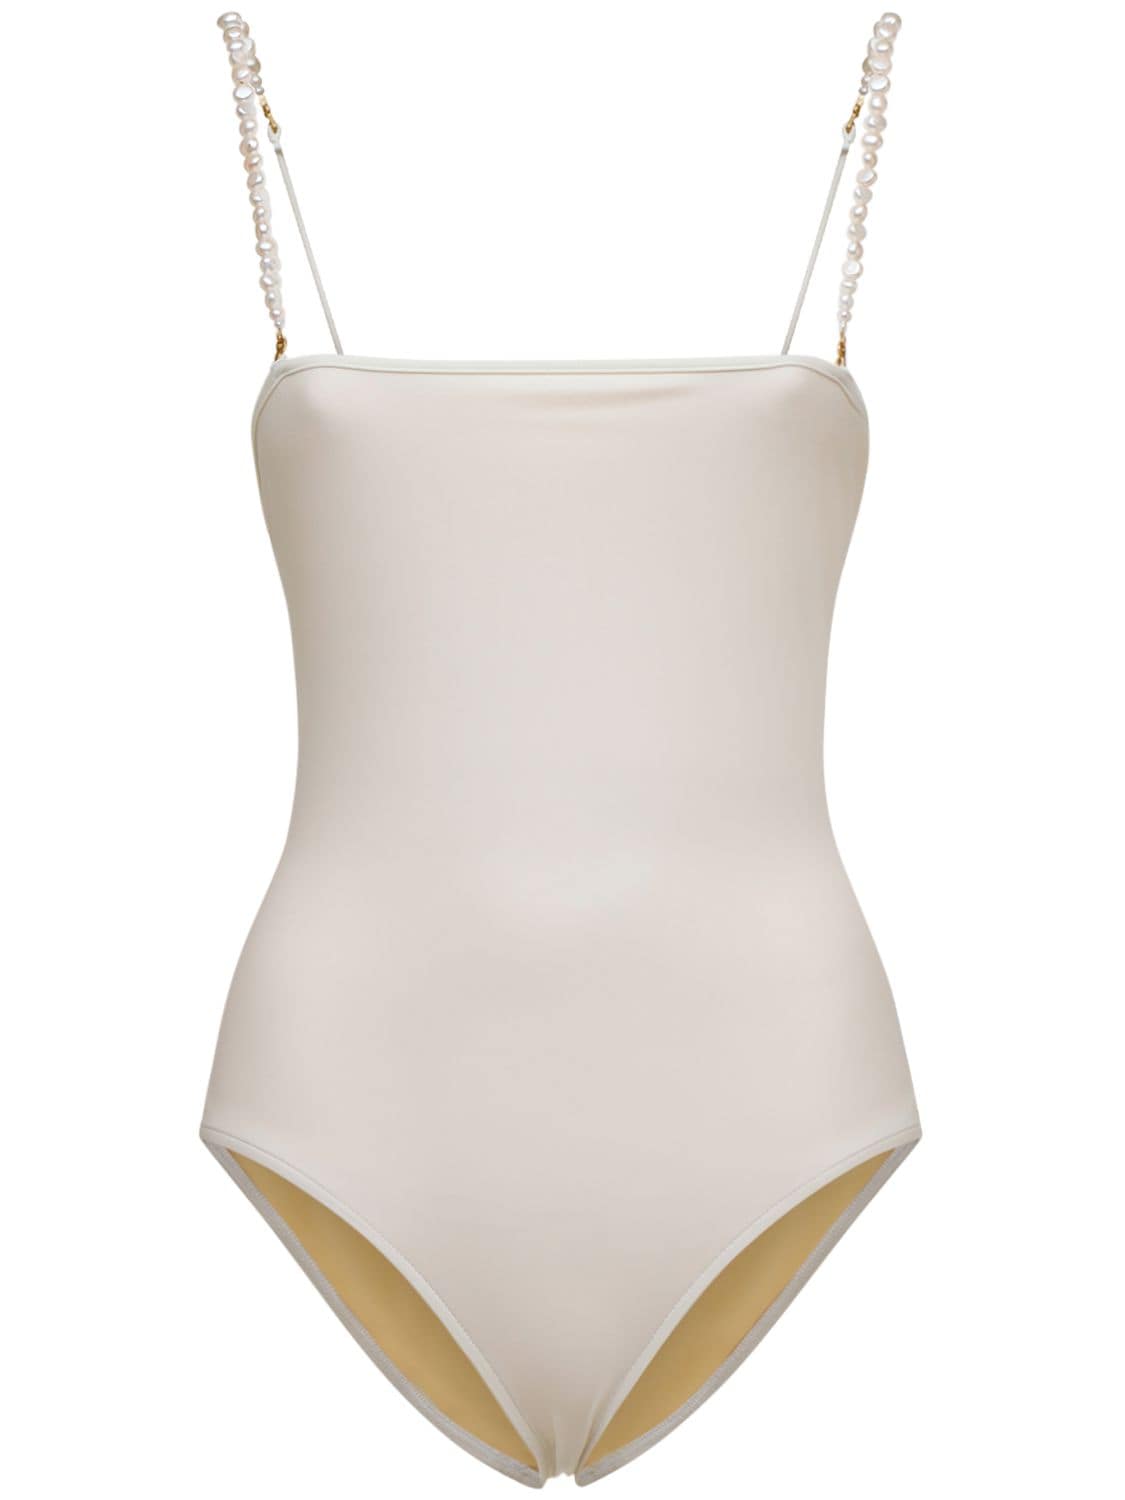 Dolla Paris Lola One Piece Swimsuit W/ Pearls In White